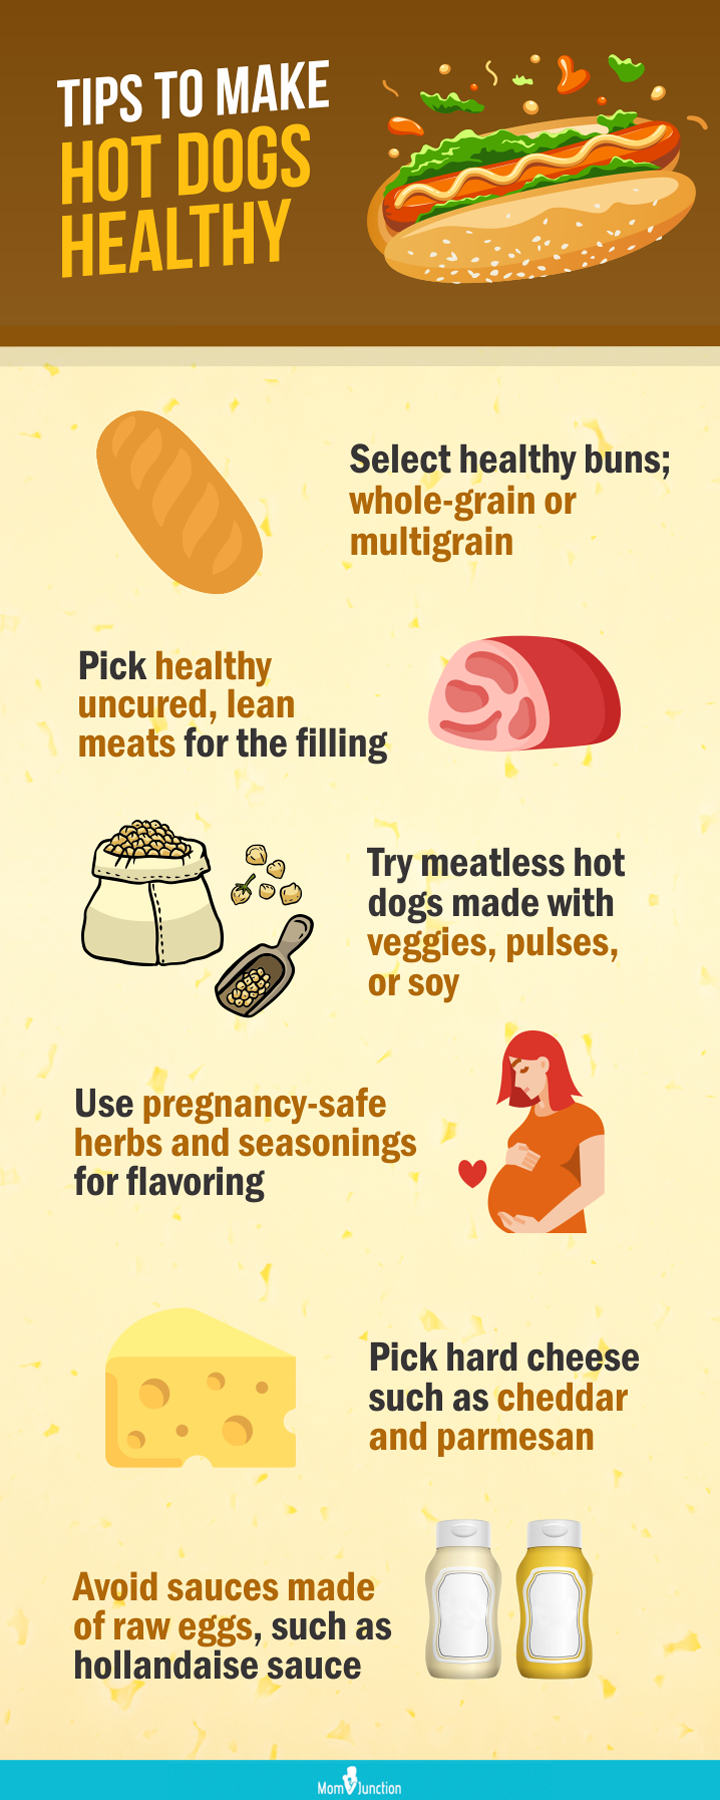 is hot dog safe during pregnancy (infographic)